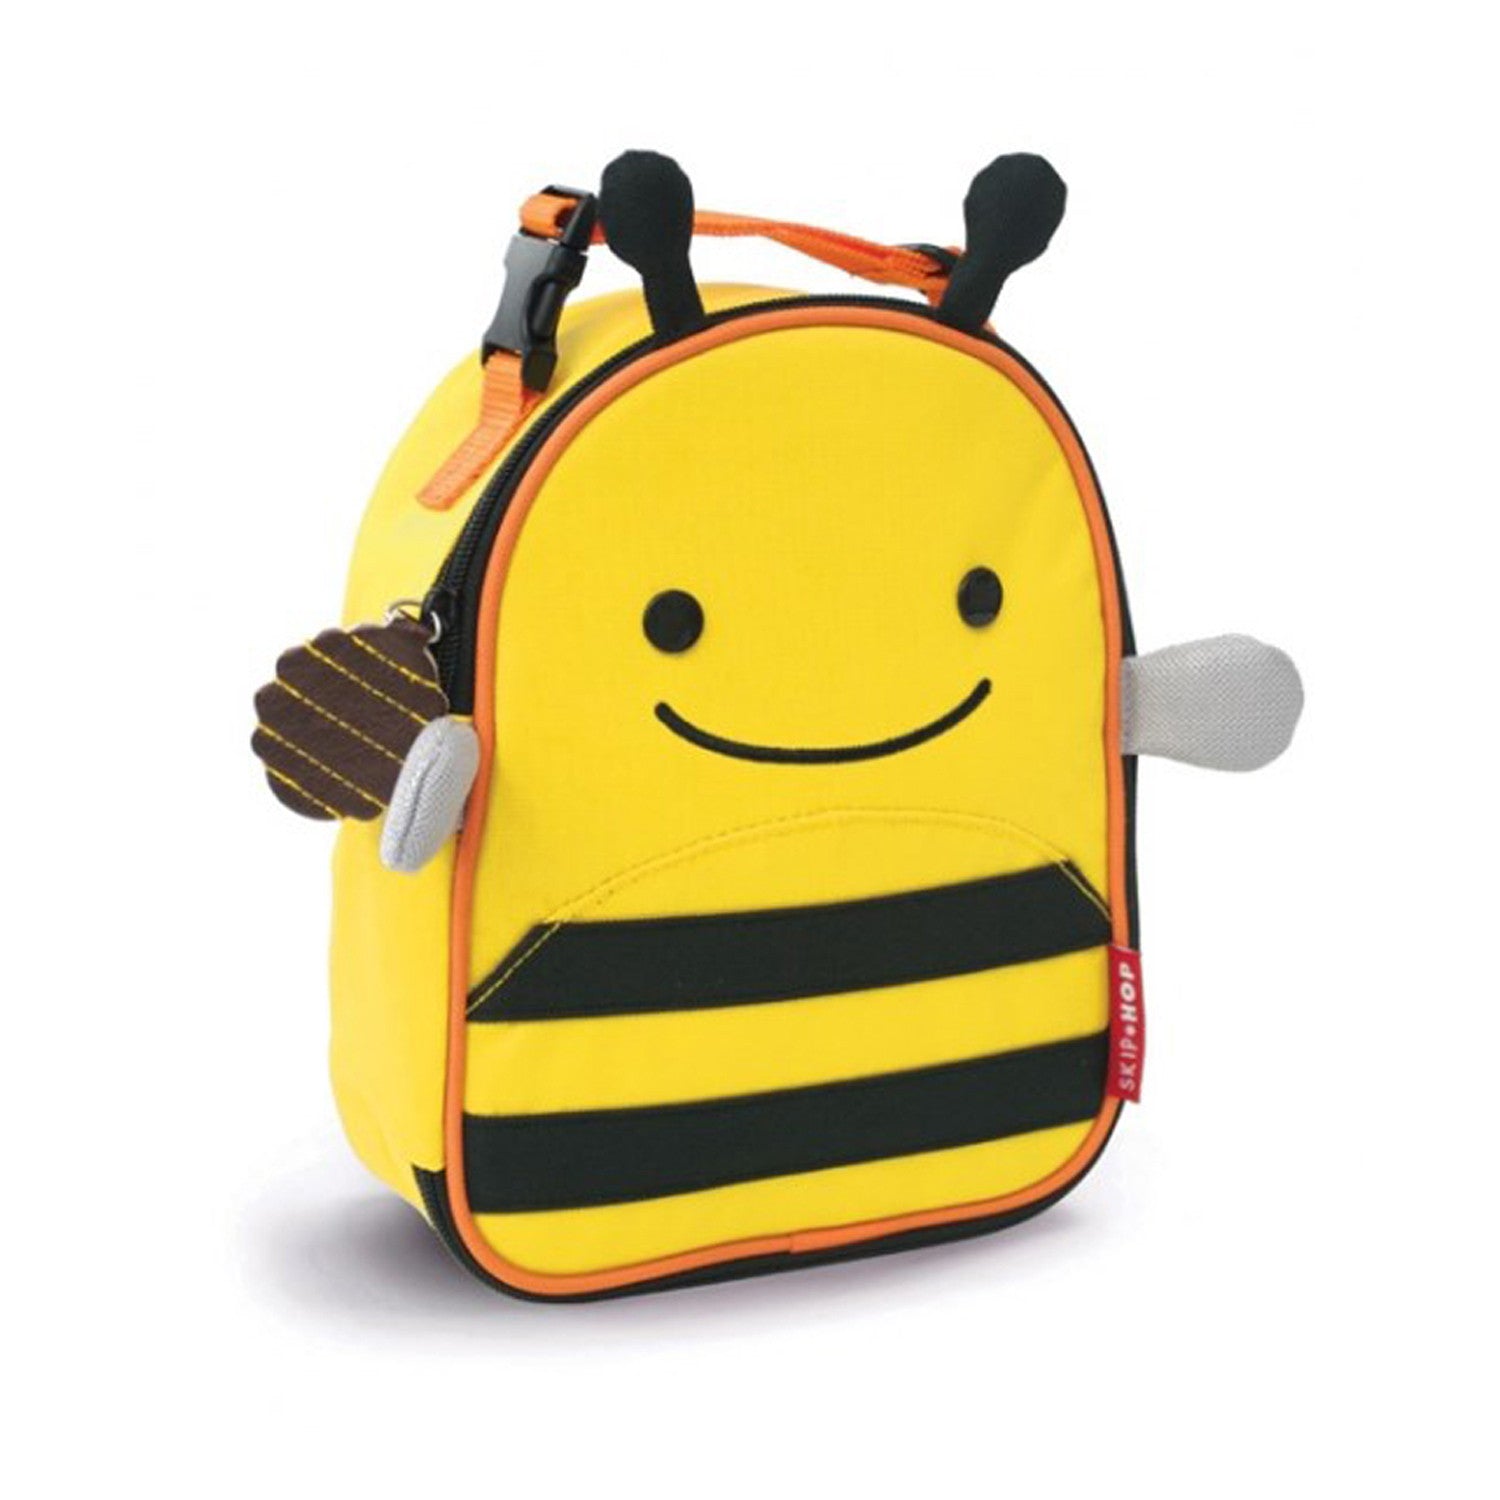 Skip Hop Zoo Safety Harness Backpack - Bee